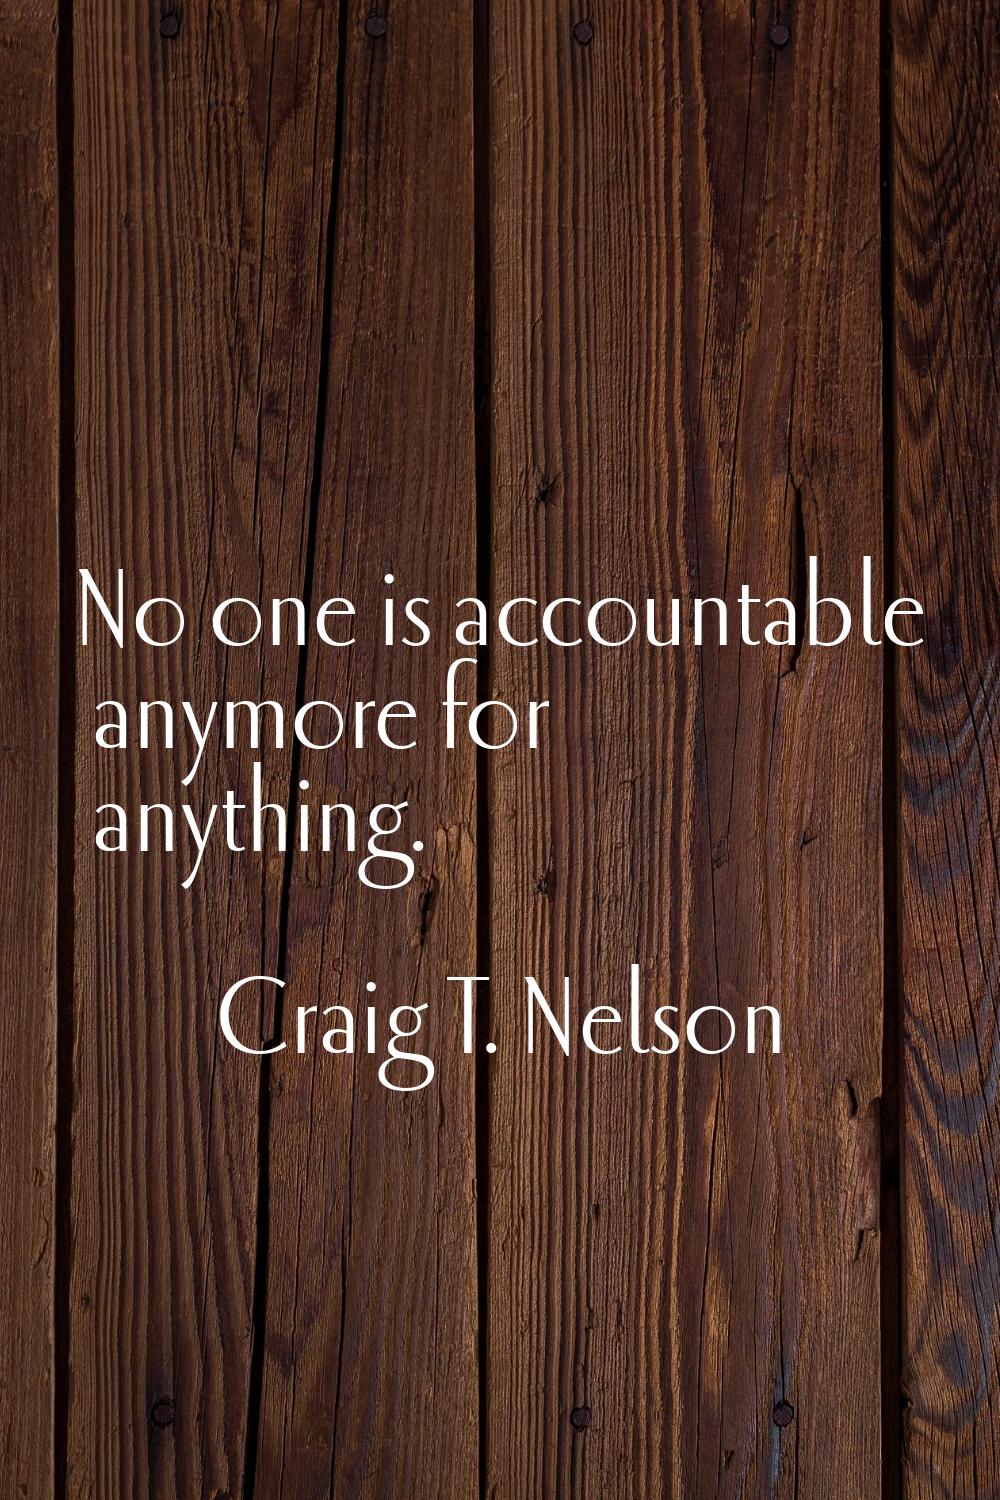 No one is accountable anymore for anything.